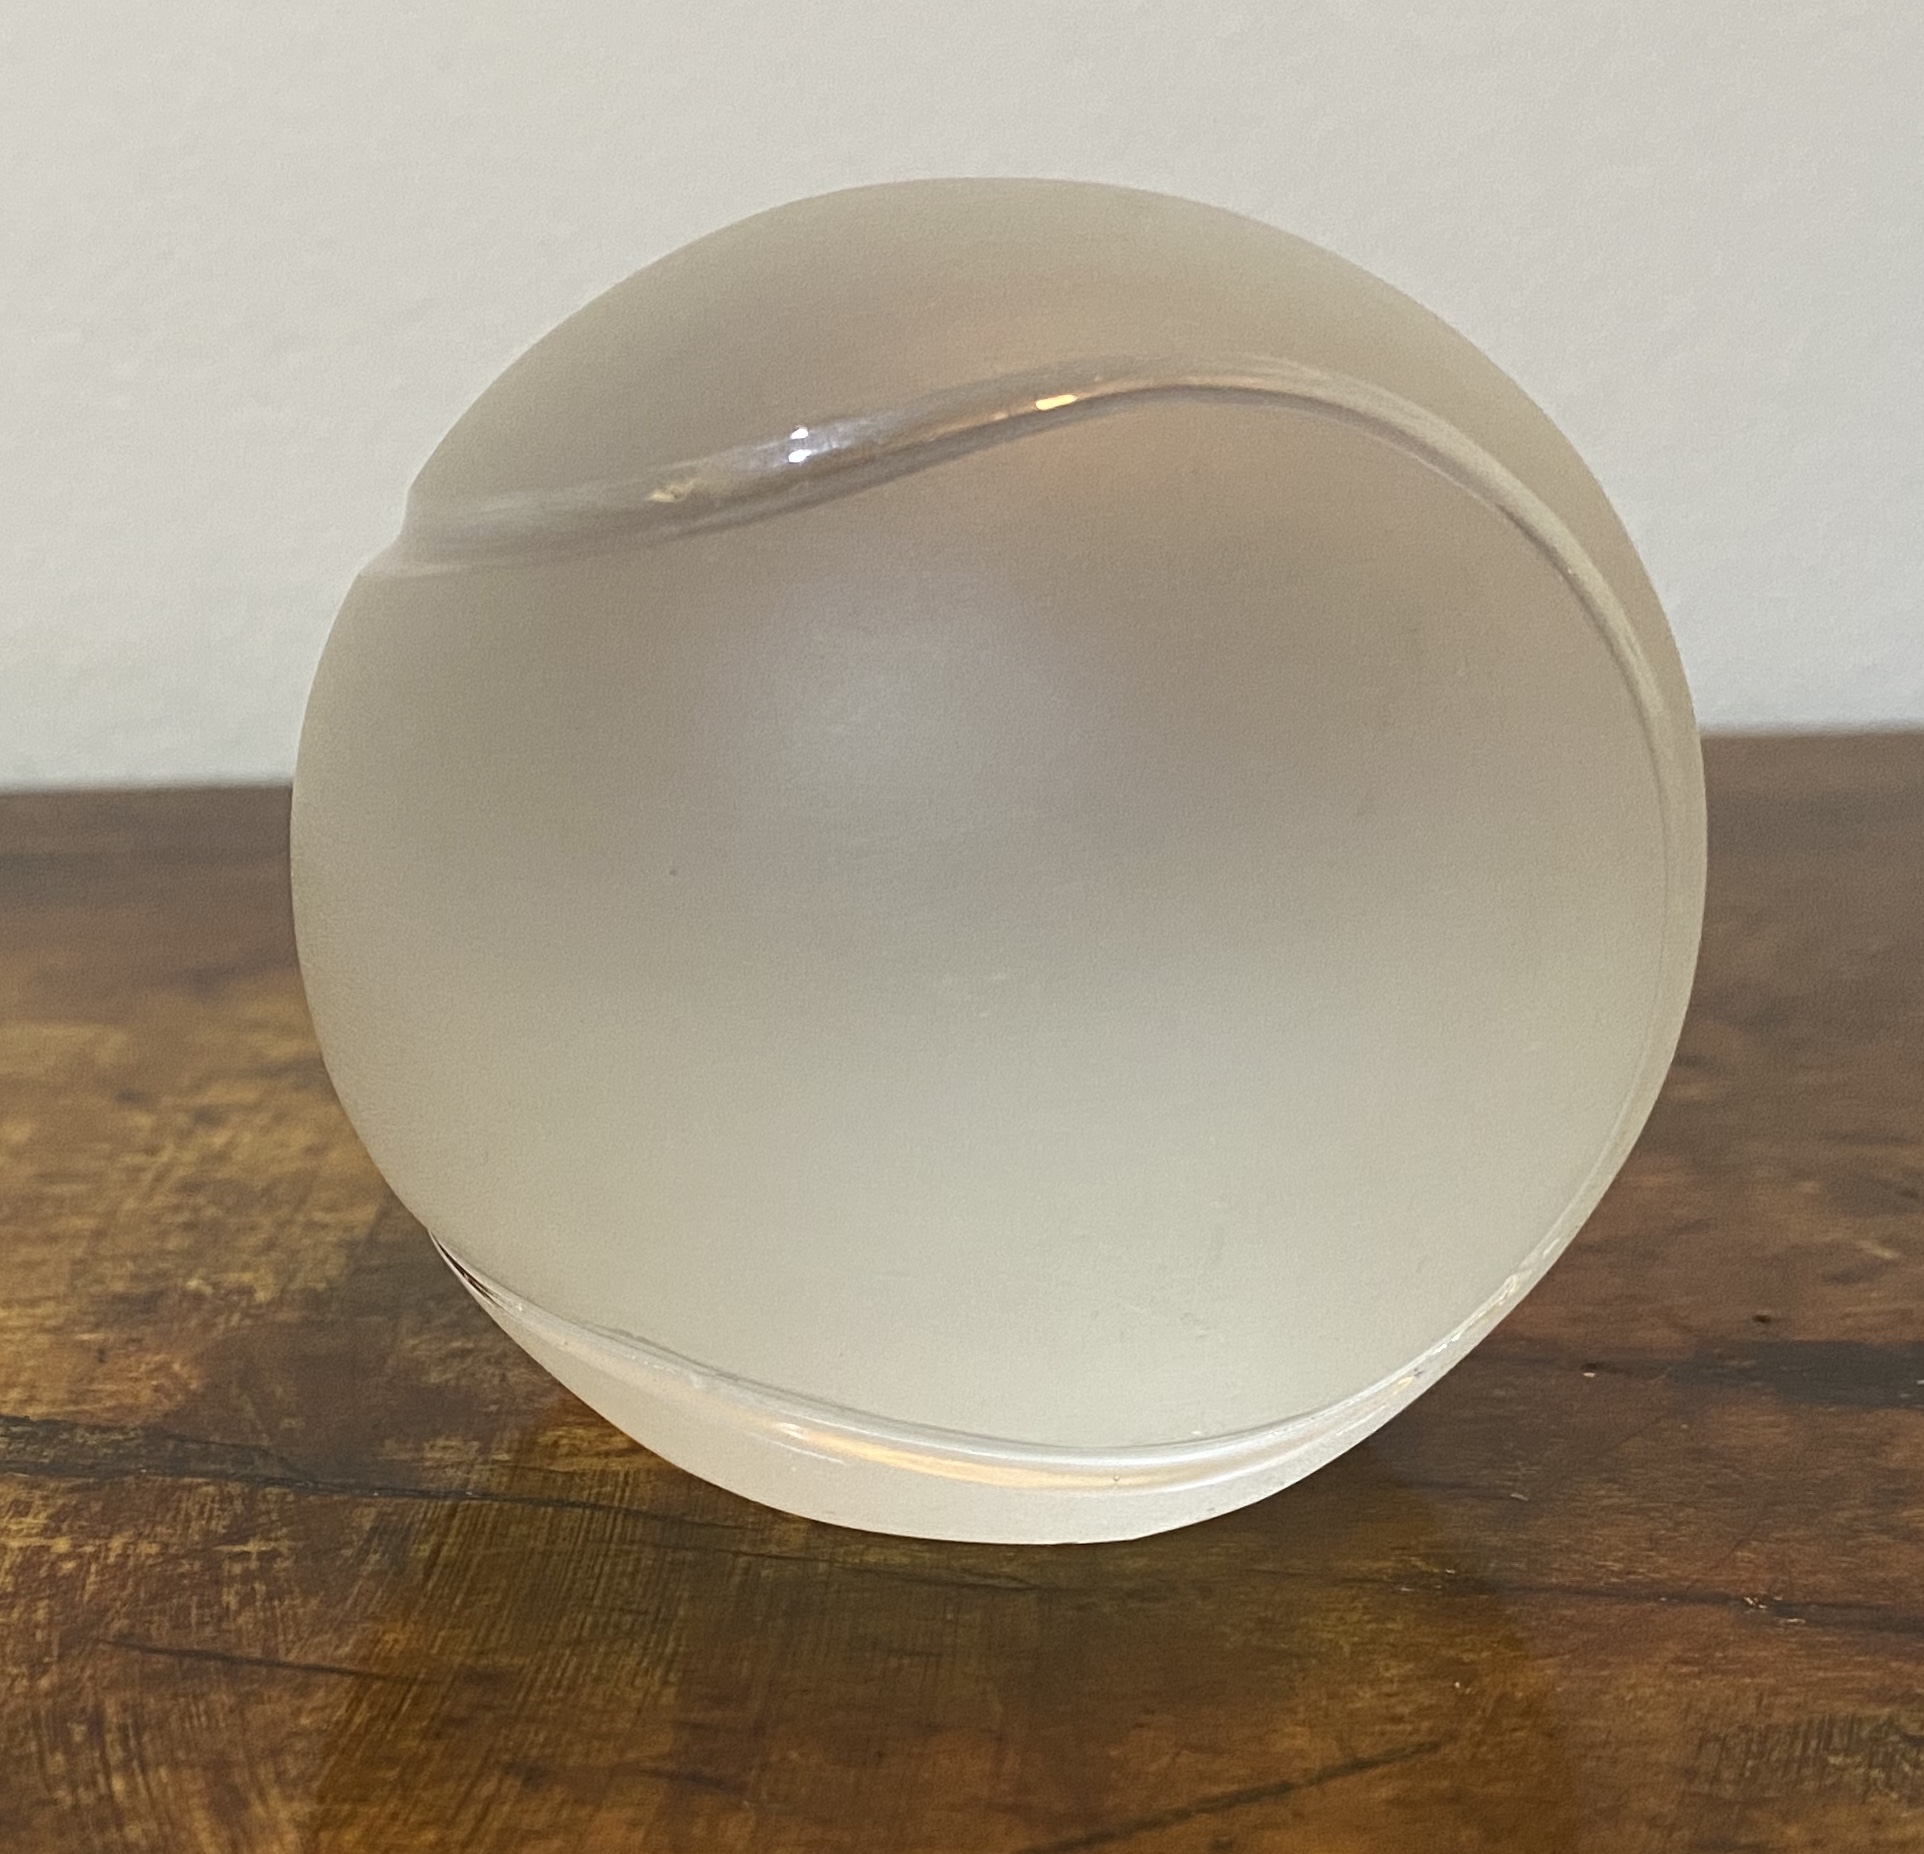 Tennis ball glass paper weight - Image 4 of 6